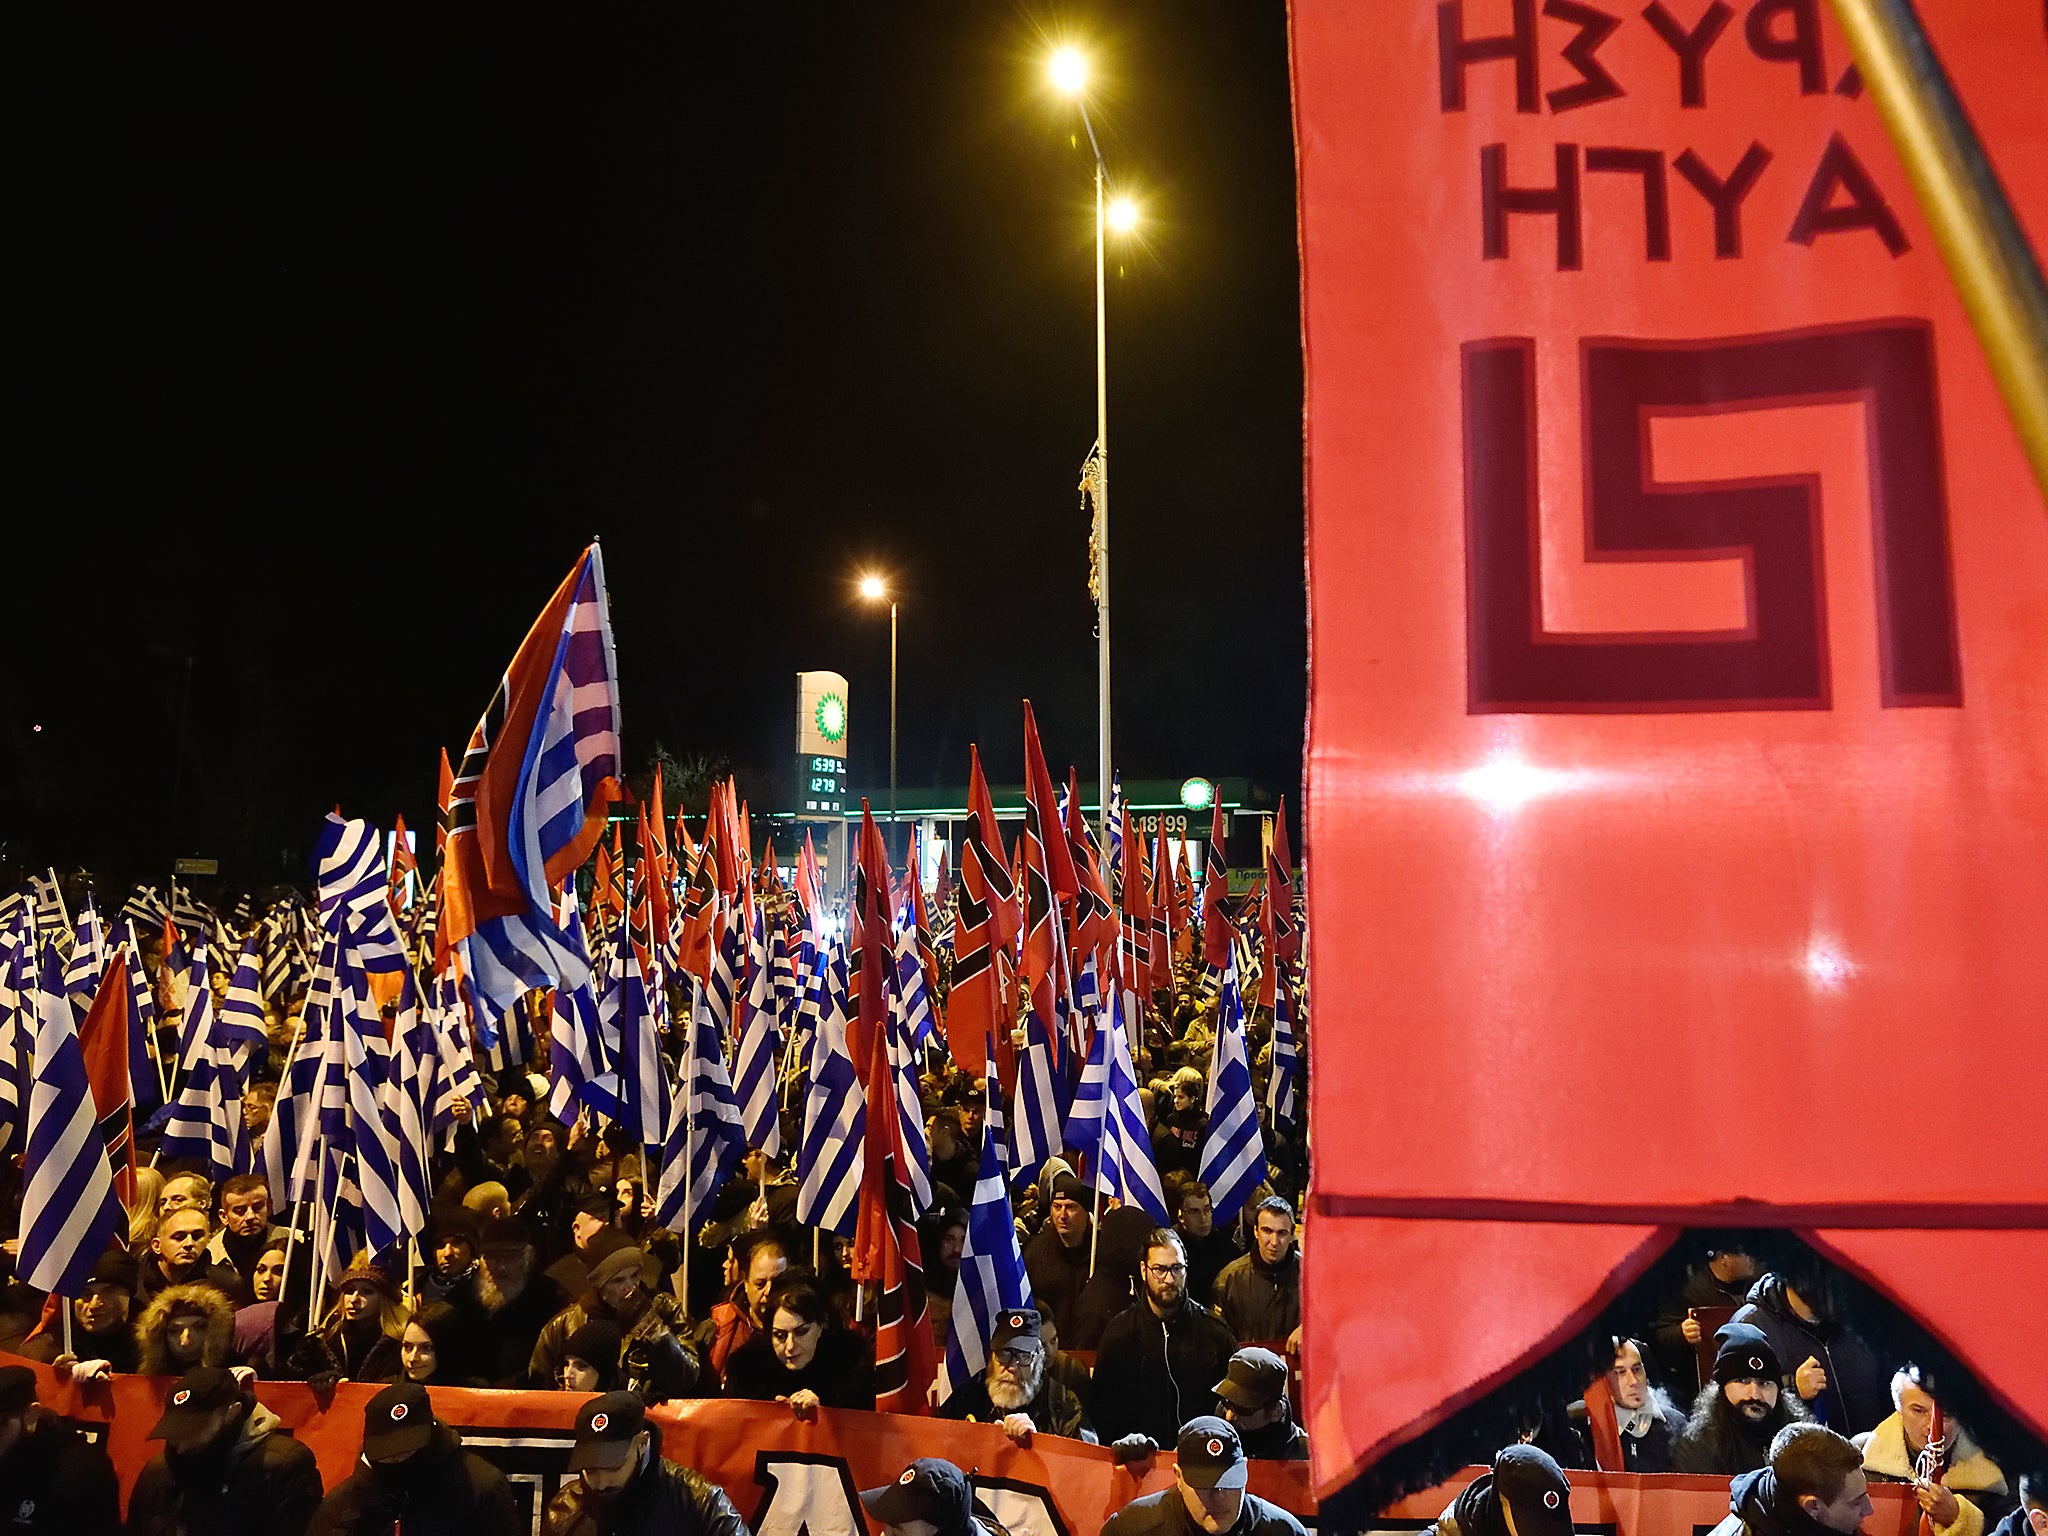 Golden Dawn supporters protest in Athens last week. Extreme ideologies in Greece are in part a legacy of the vicious civil war there in the late 1940s